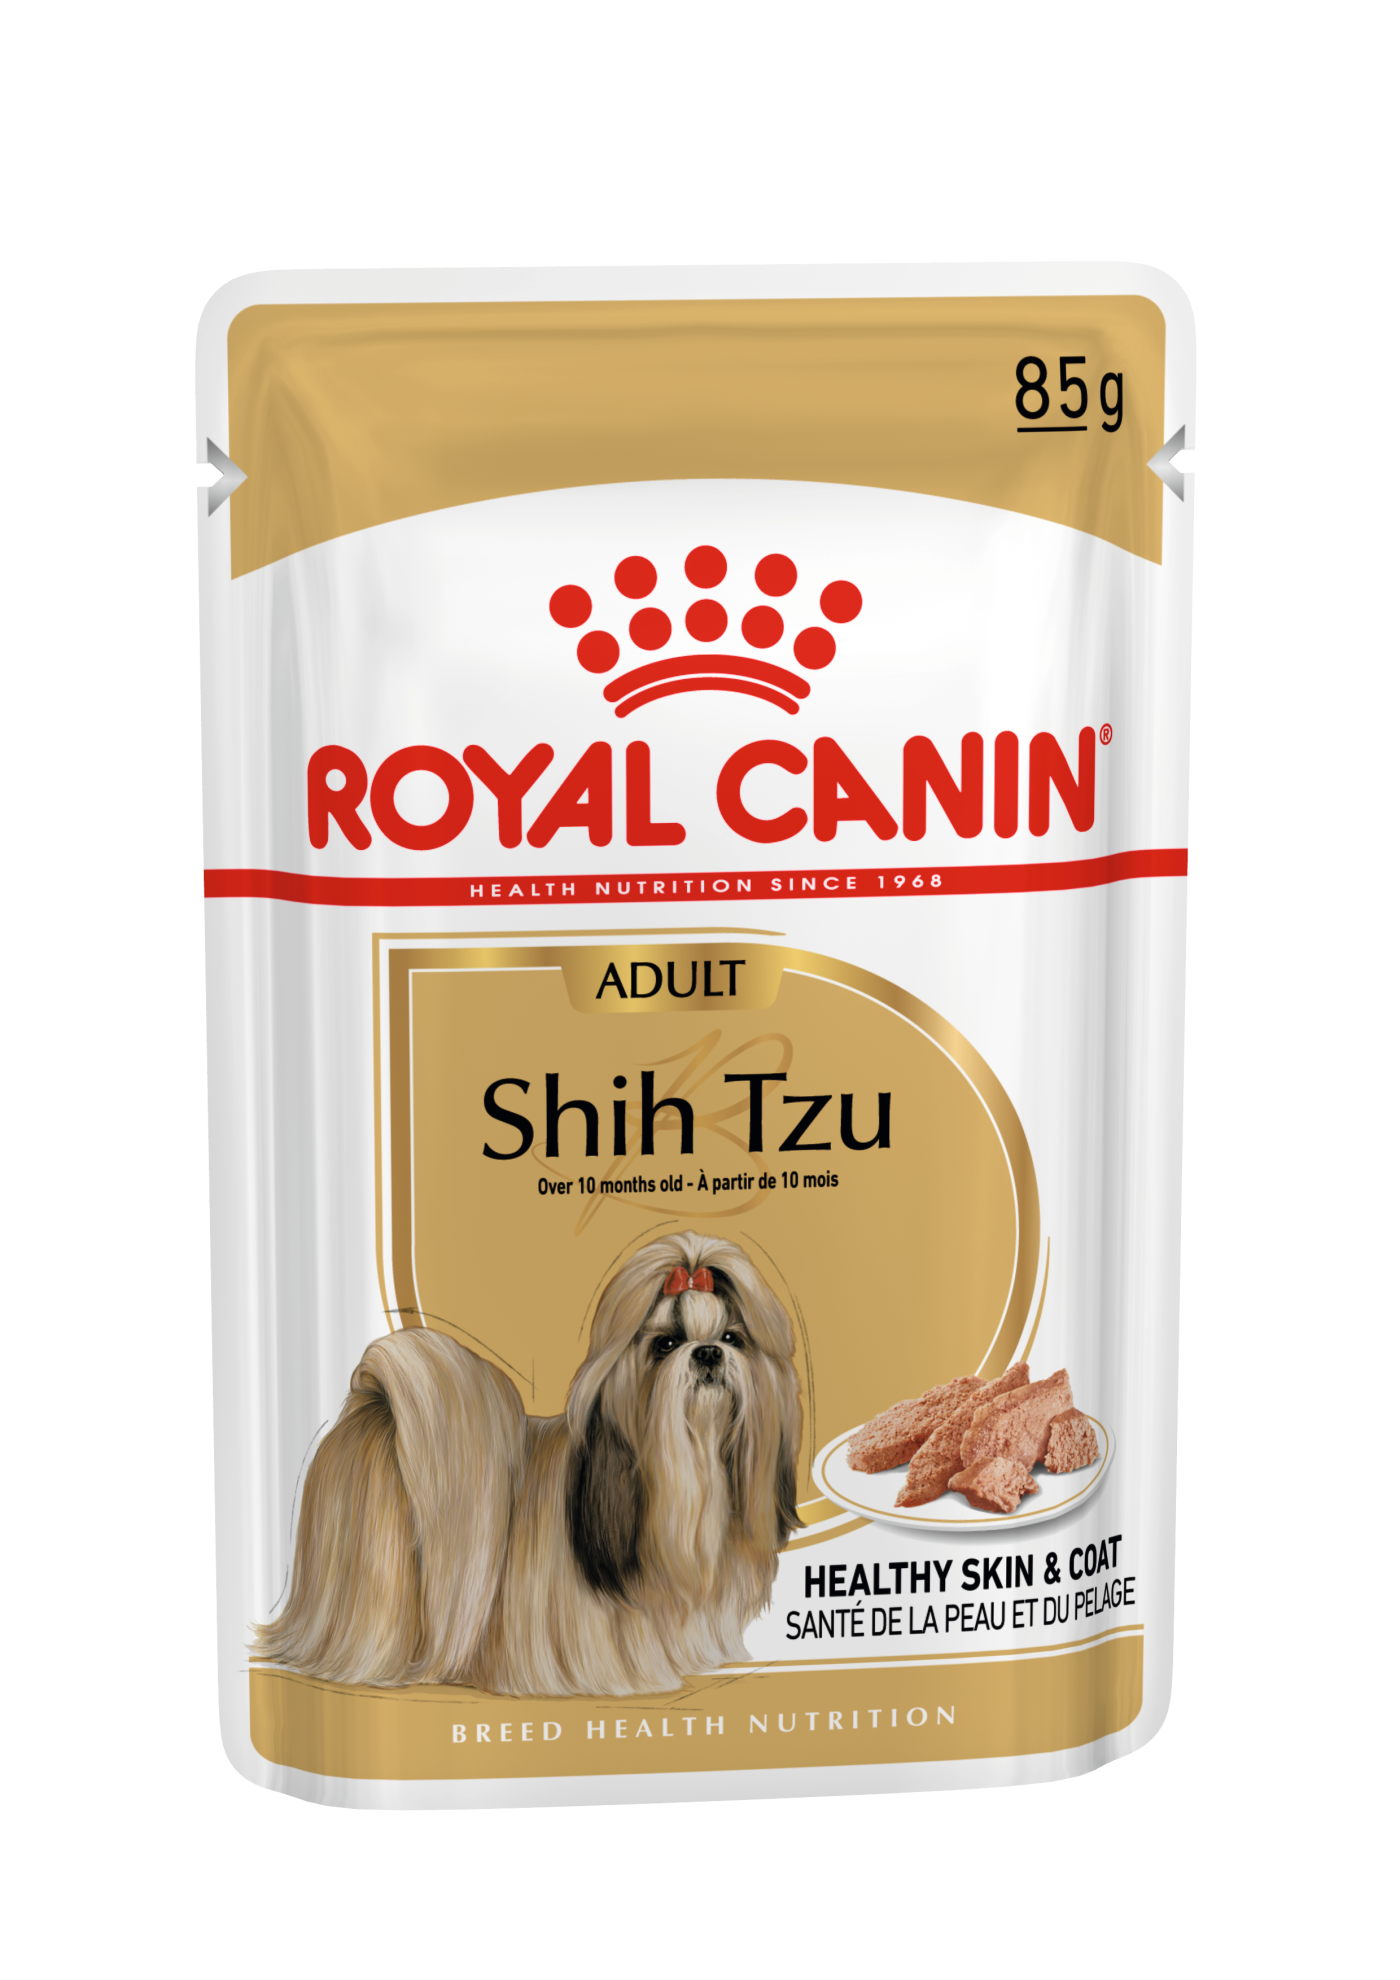 royal canin for lhasa apso